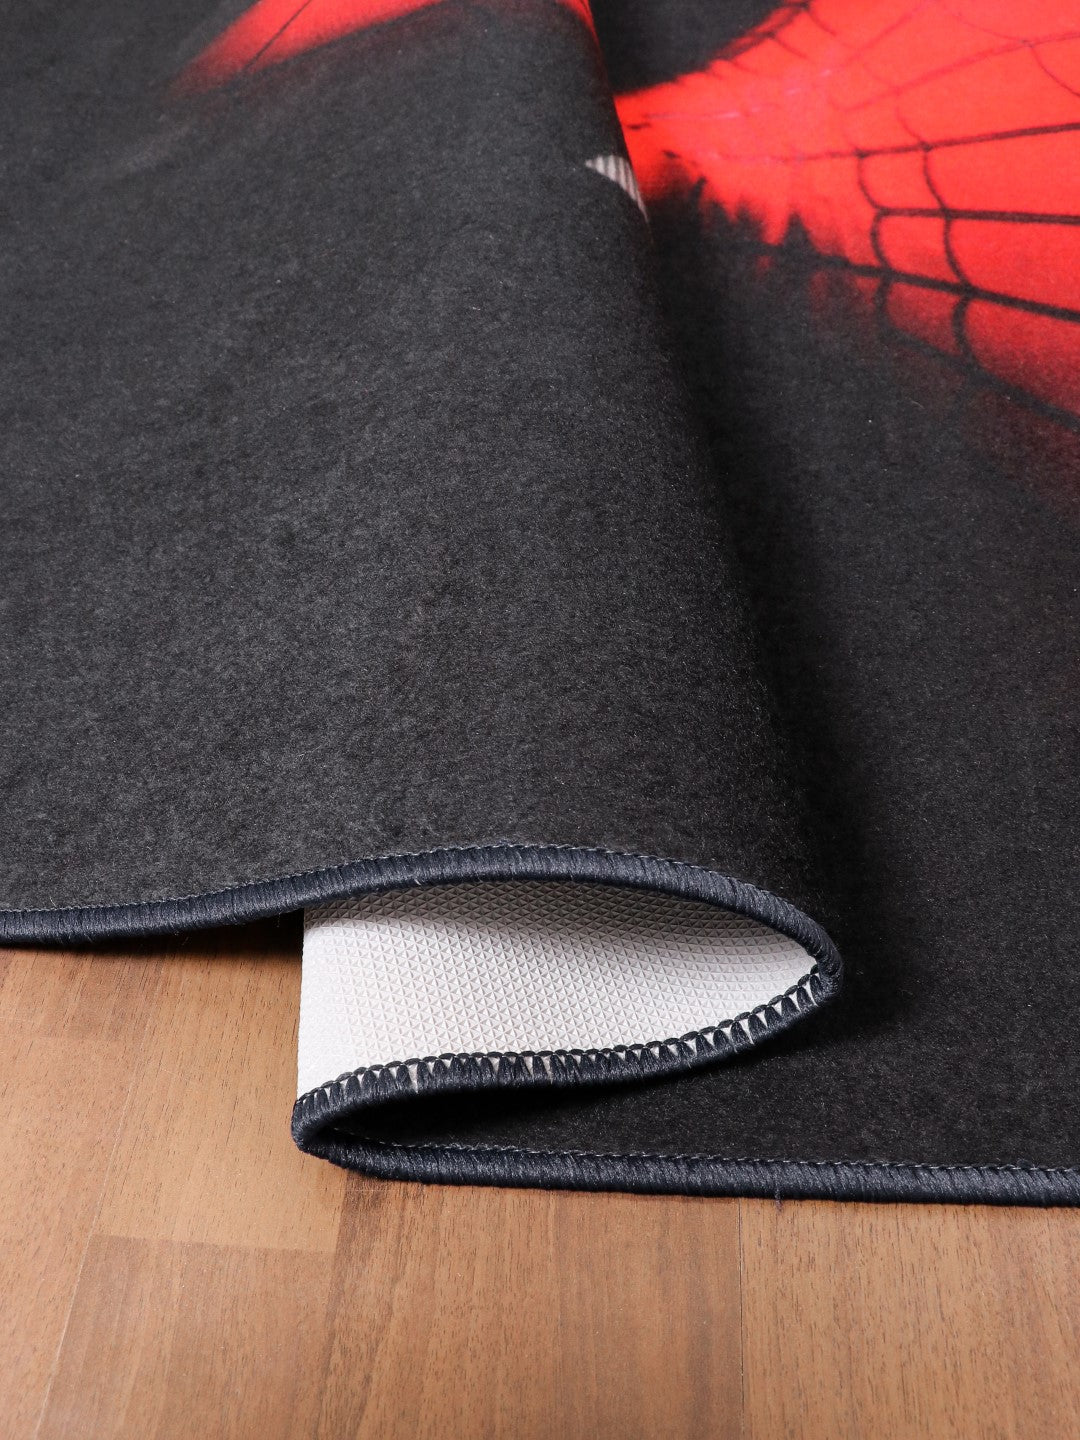 Black with Red Spider Man Rectangle Kids Non Woven Rug with Non Slip TPR Backing For Everyday Use